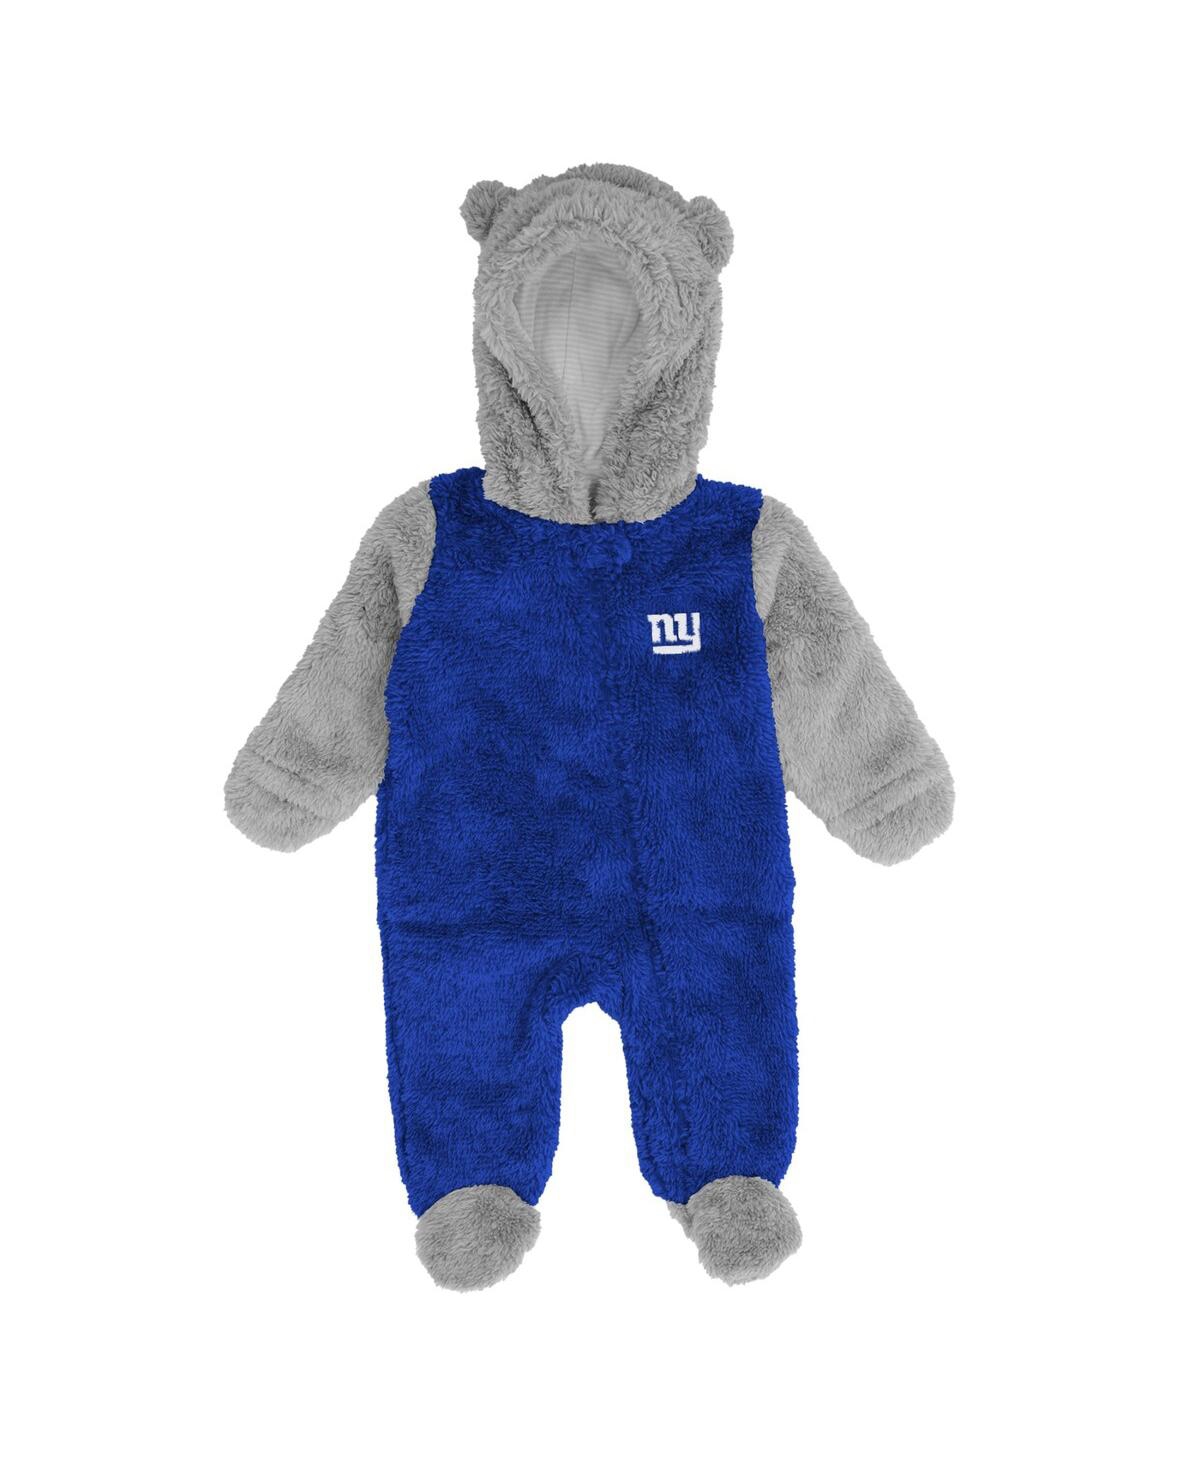 Outerstuff Babies' Newborn And Infant Boys And Girls Royal, Gray New York Giants Game Nap Teddy Fleece Bunting Full-zip In Royal,gray